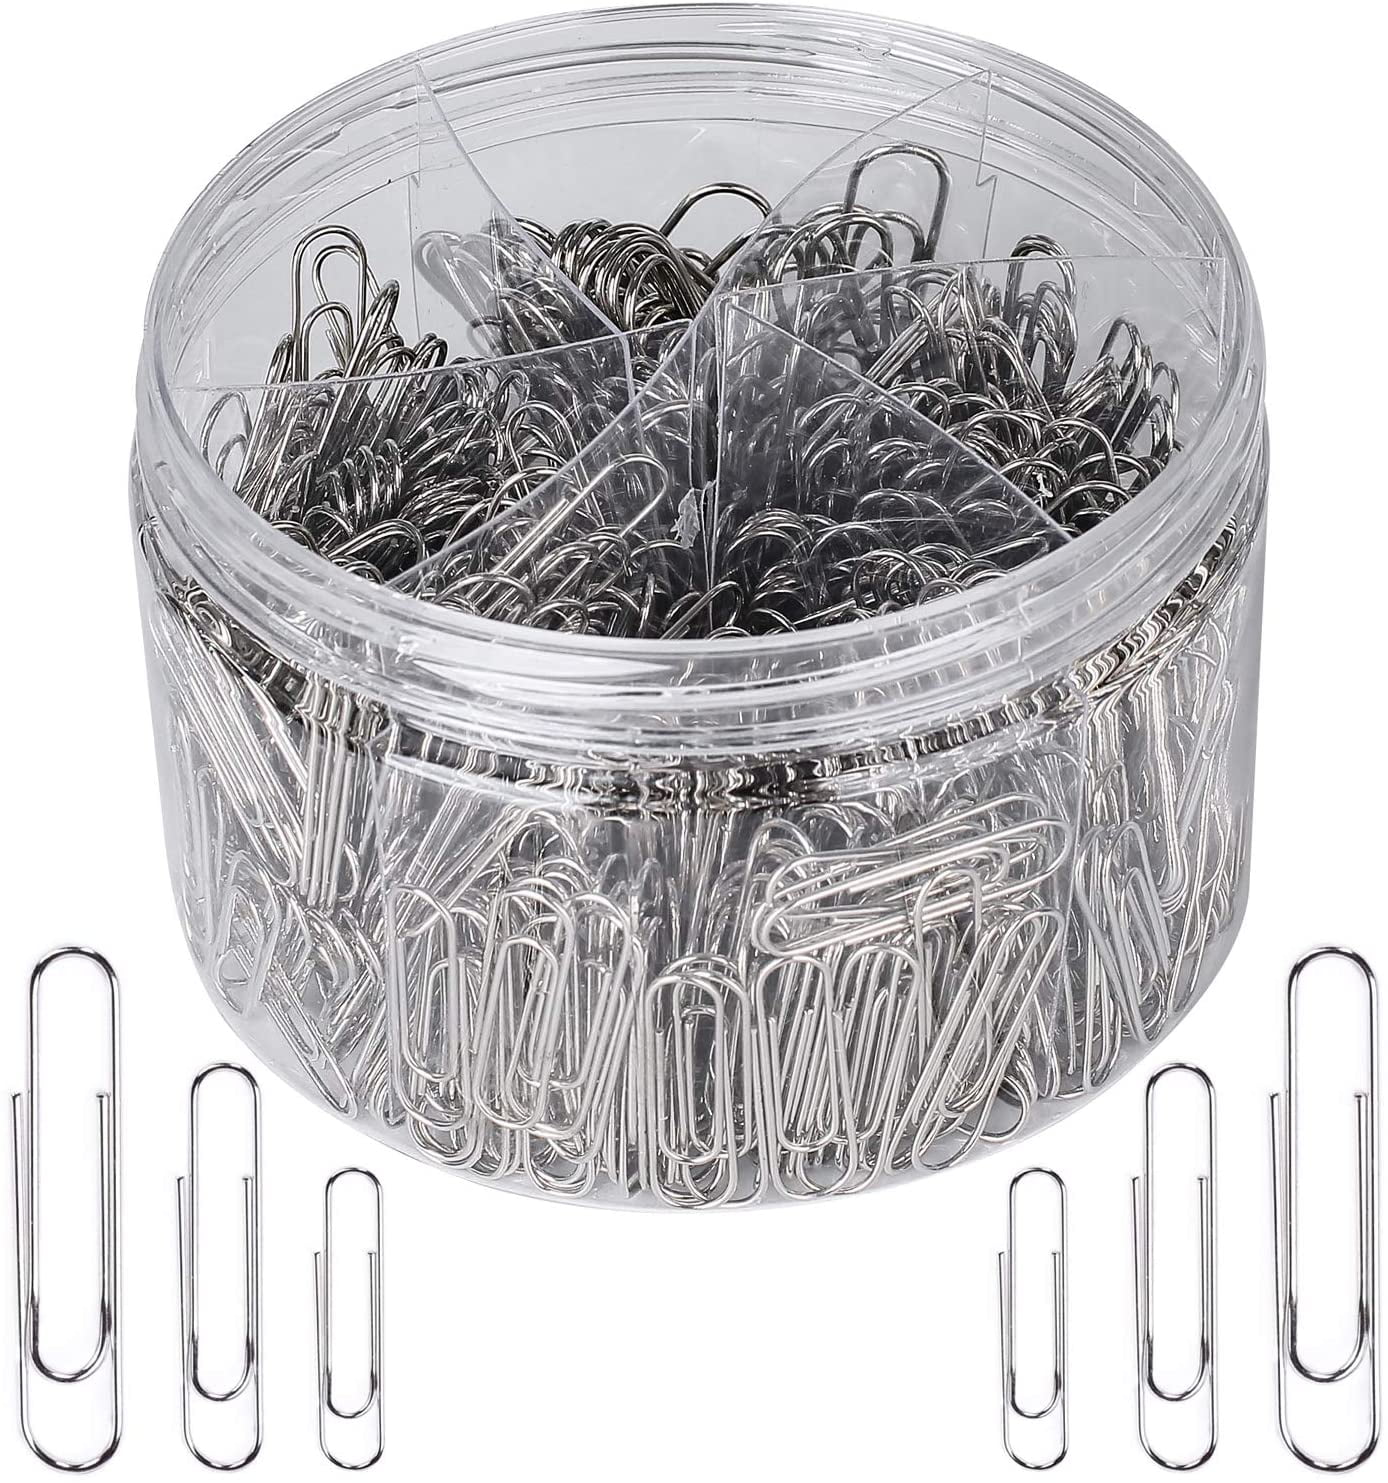 28 mm, 33mm and 50 mm 700 Pcs Paperclips for Office and Personal Document Organization Silver Paper Clips 